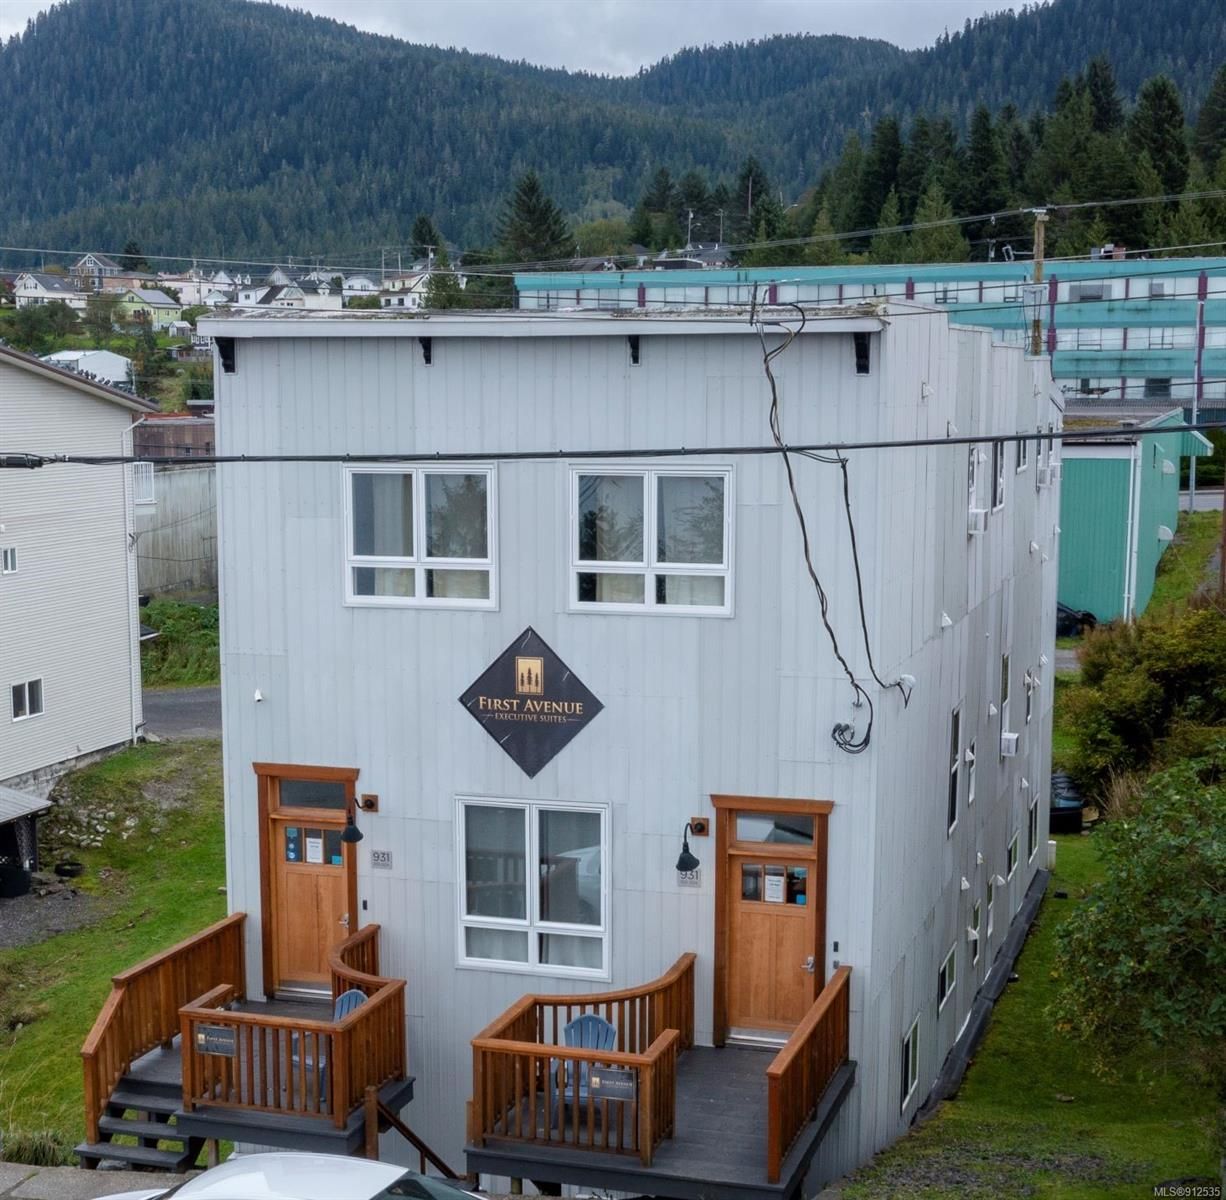 Main Photo: 931 W 1st Ave in Prince Rupert: Other Boards Multi Family for sale : MLS®# 912535